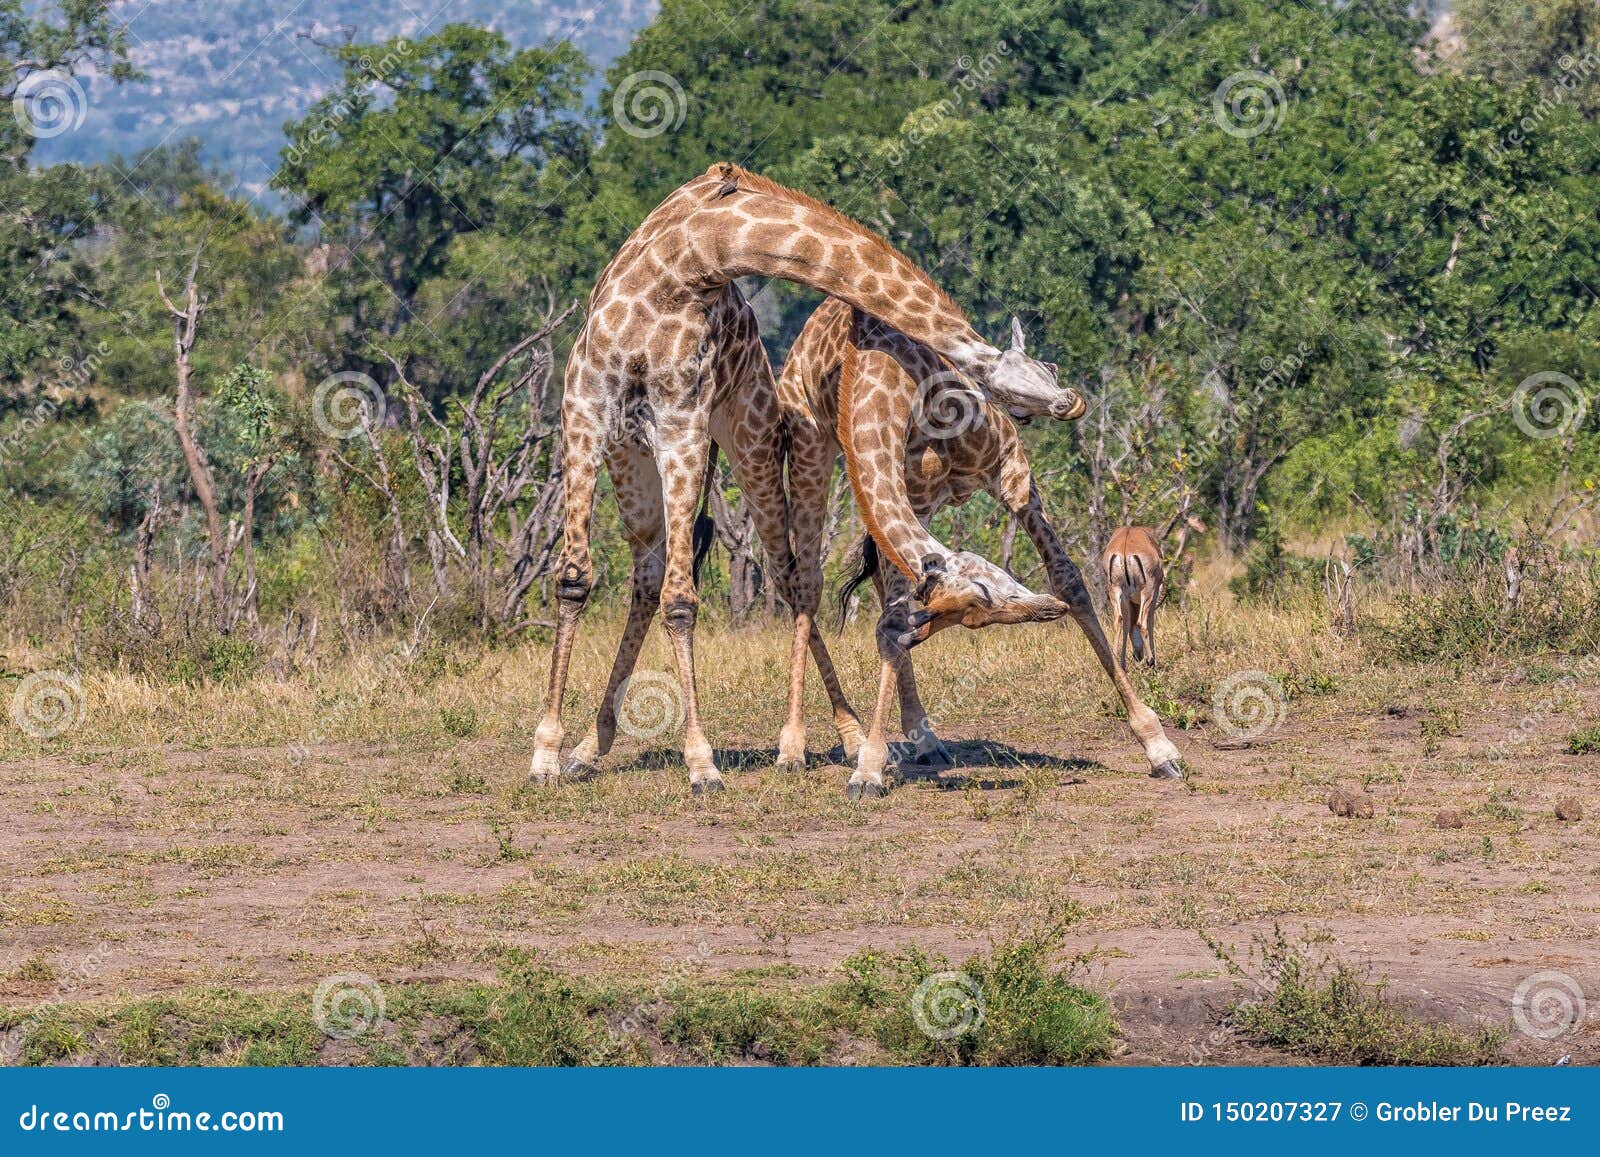 two bull giraffes, , fighting with their neck, called necking